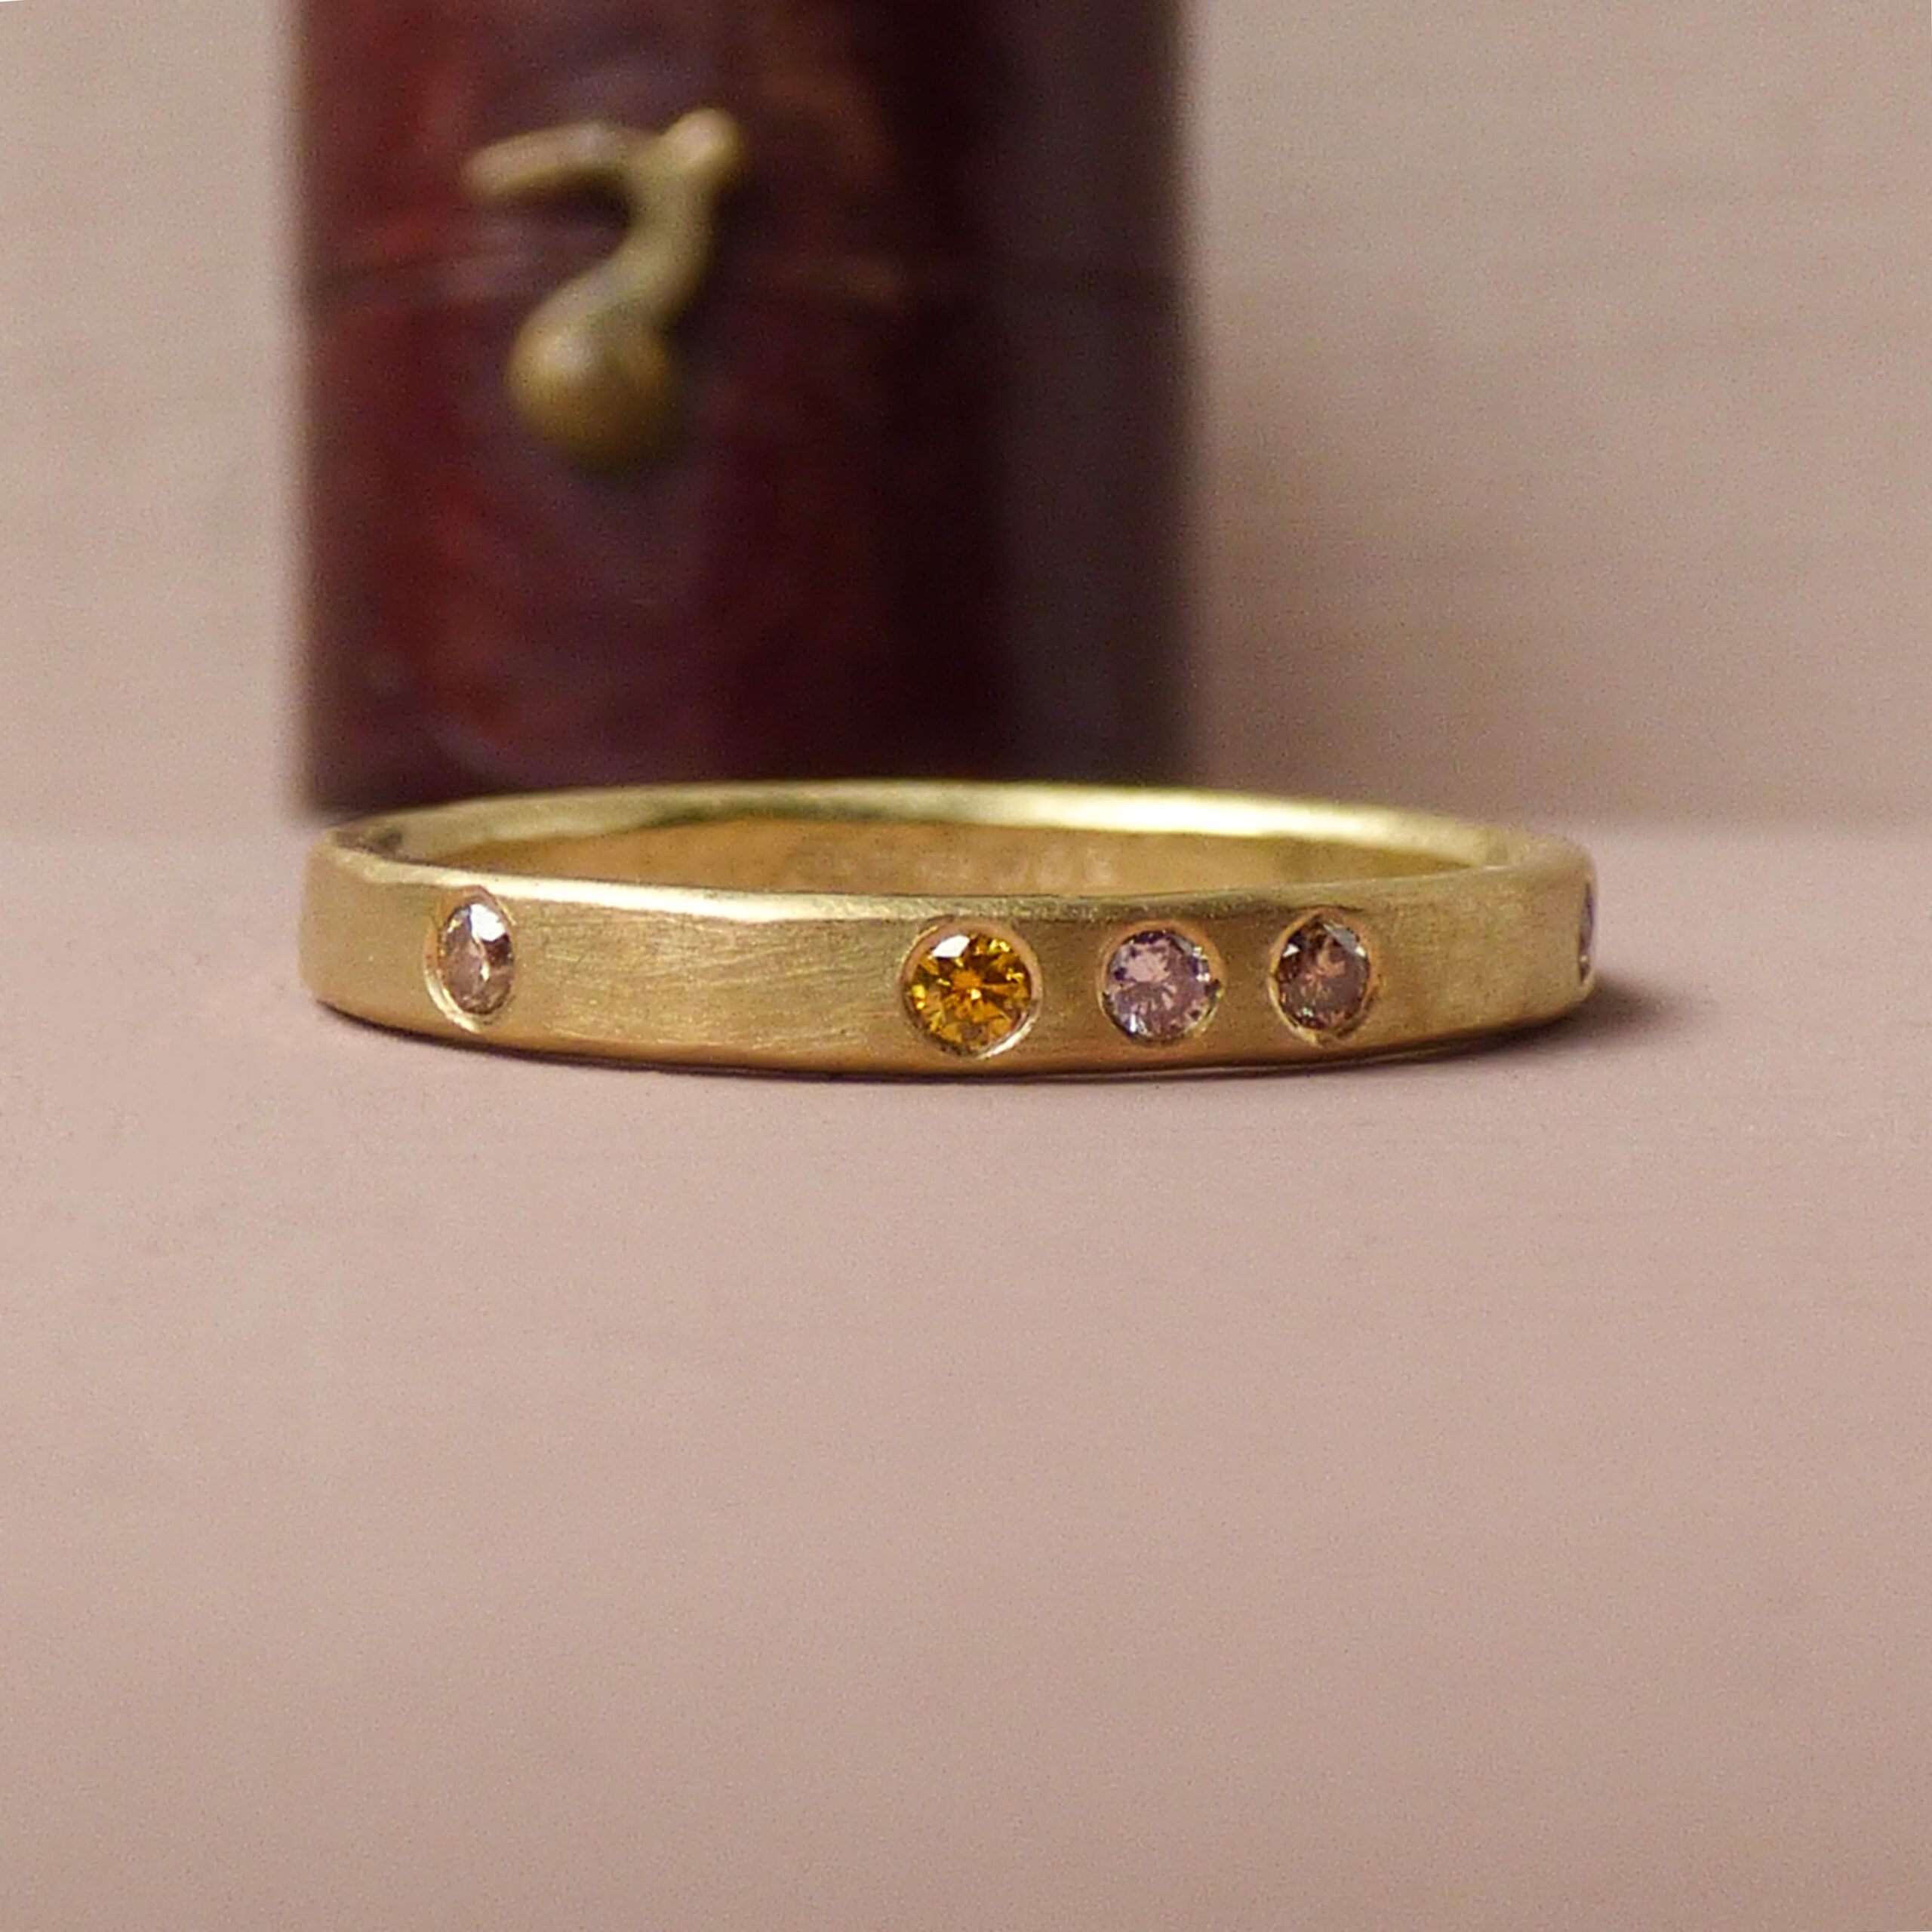 Dusk ethical wedding ring made with 18ct Fairtrade gold and pink chocolate and mandarin coloured diamonds